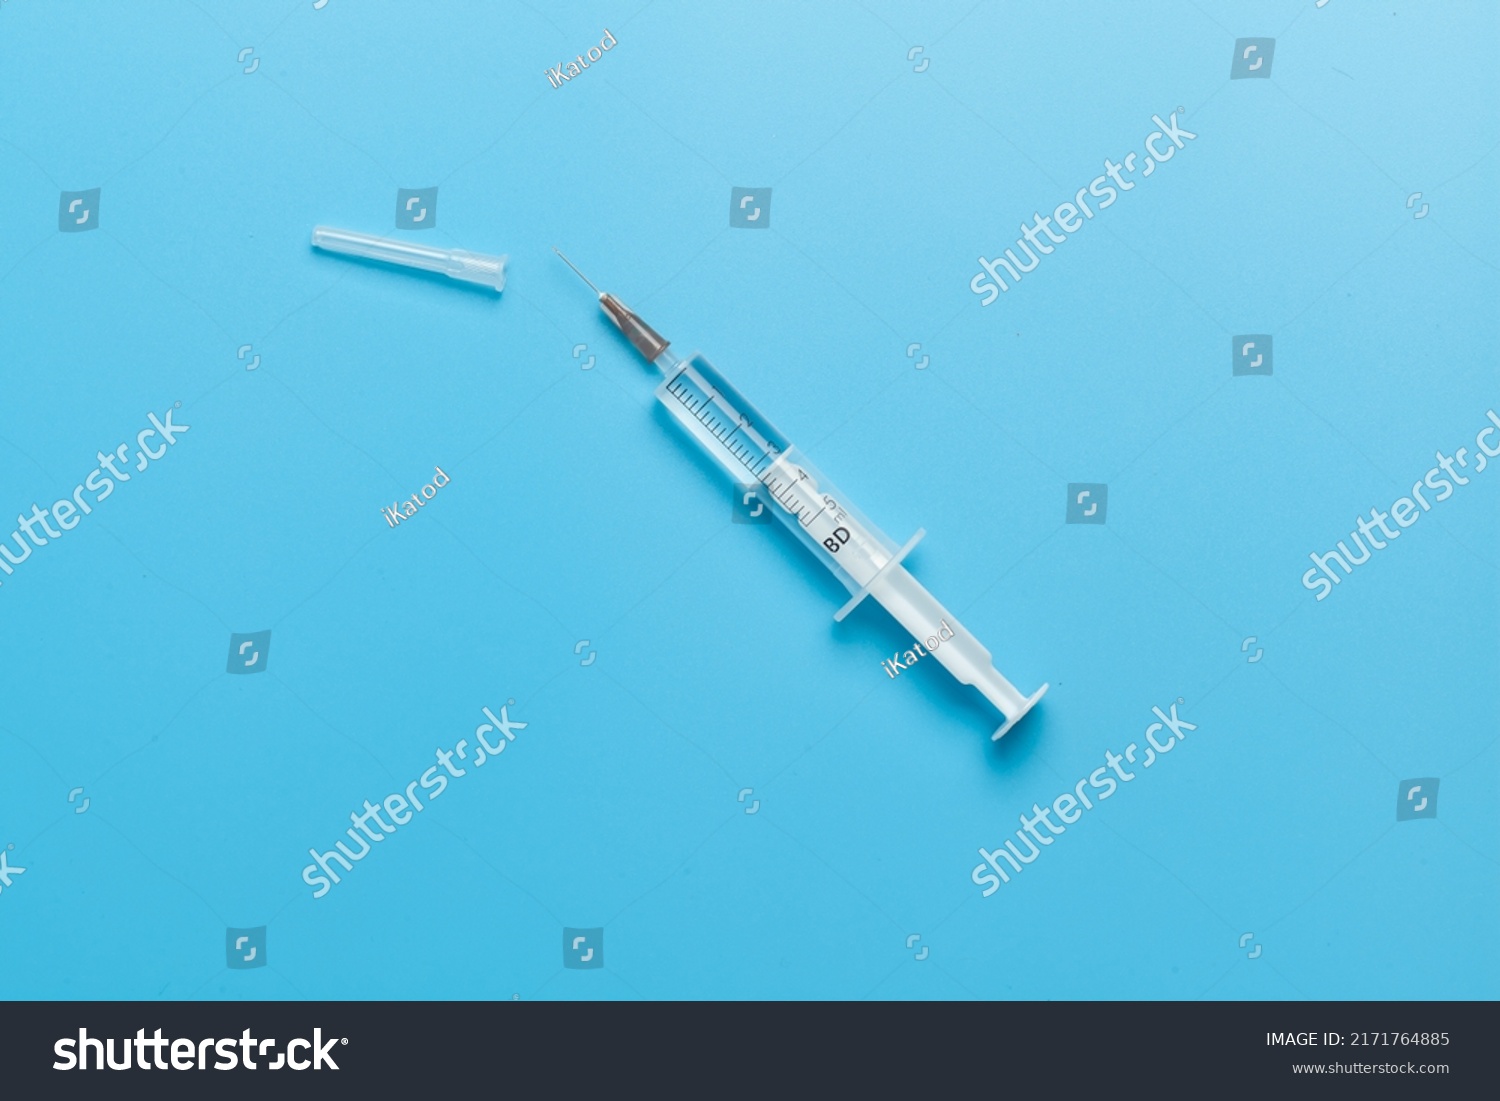 Medical syringe for liquid 5 ml. White medical syringe with a cap, isolated on a blue background. #2171764885